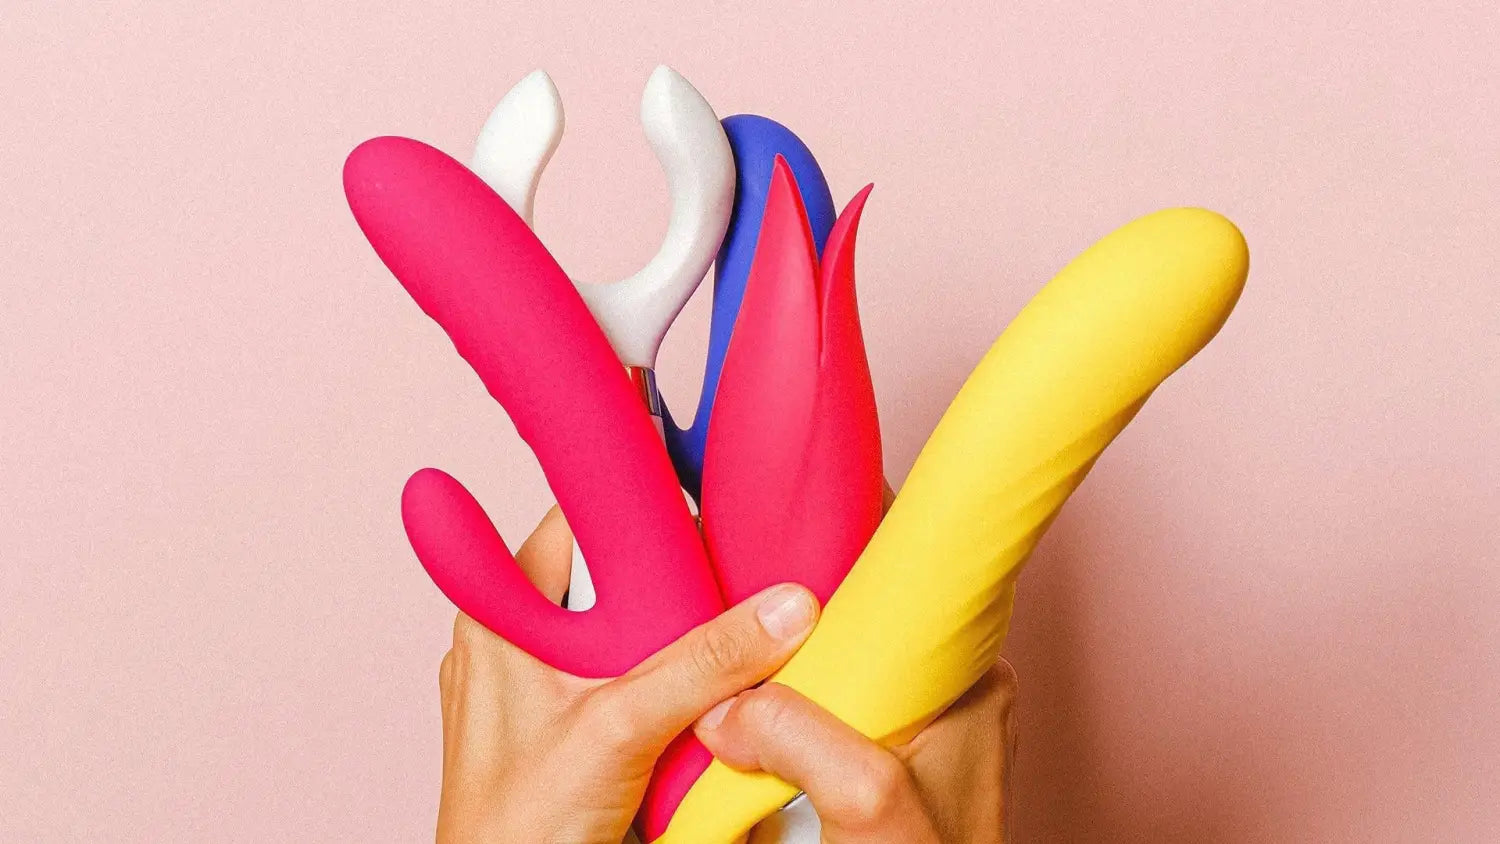 Women's Blog to Better Orgasms - With Dildos!